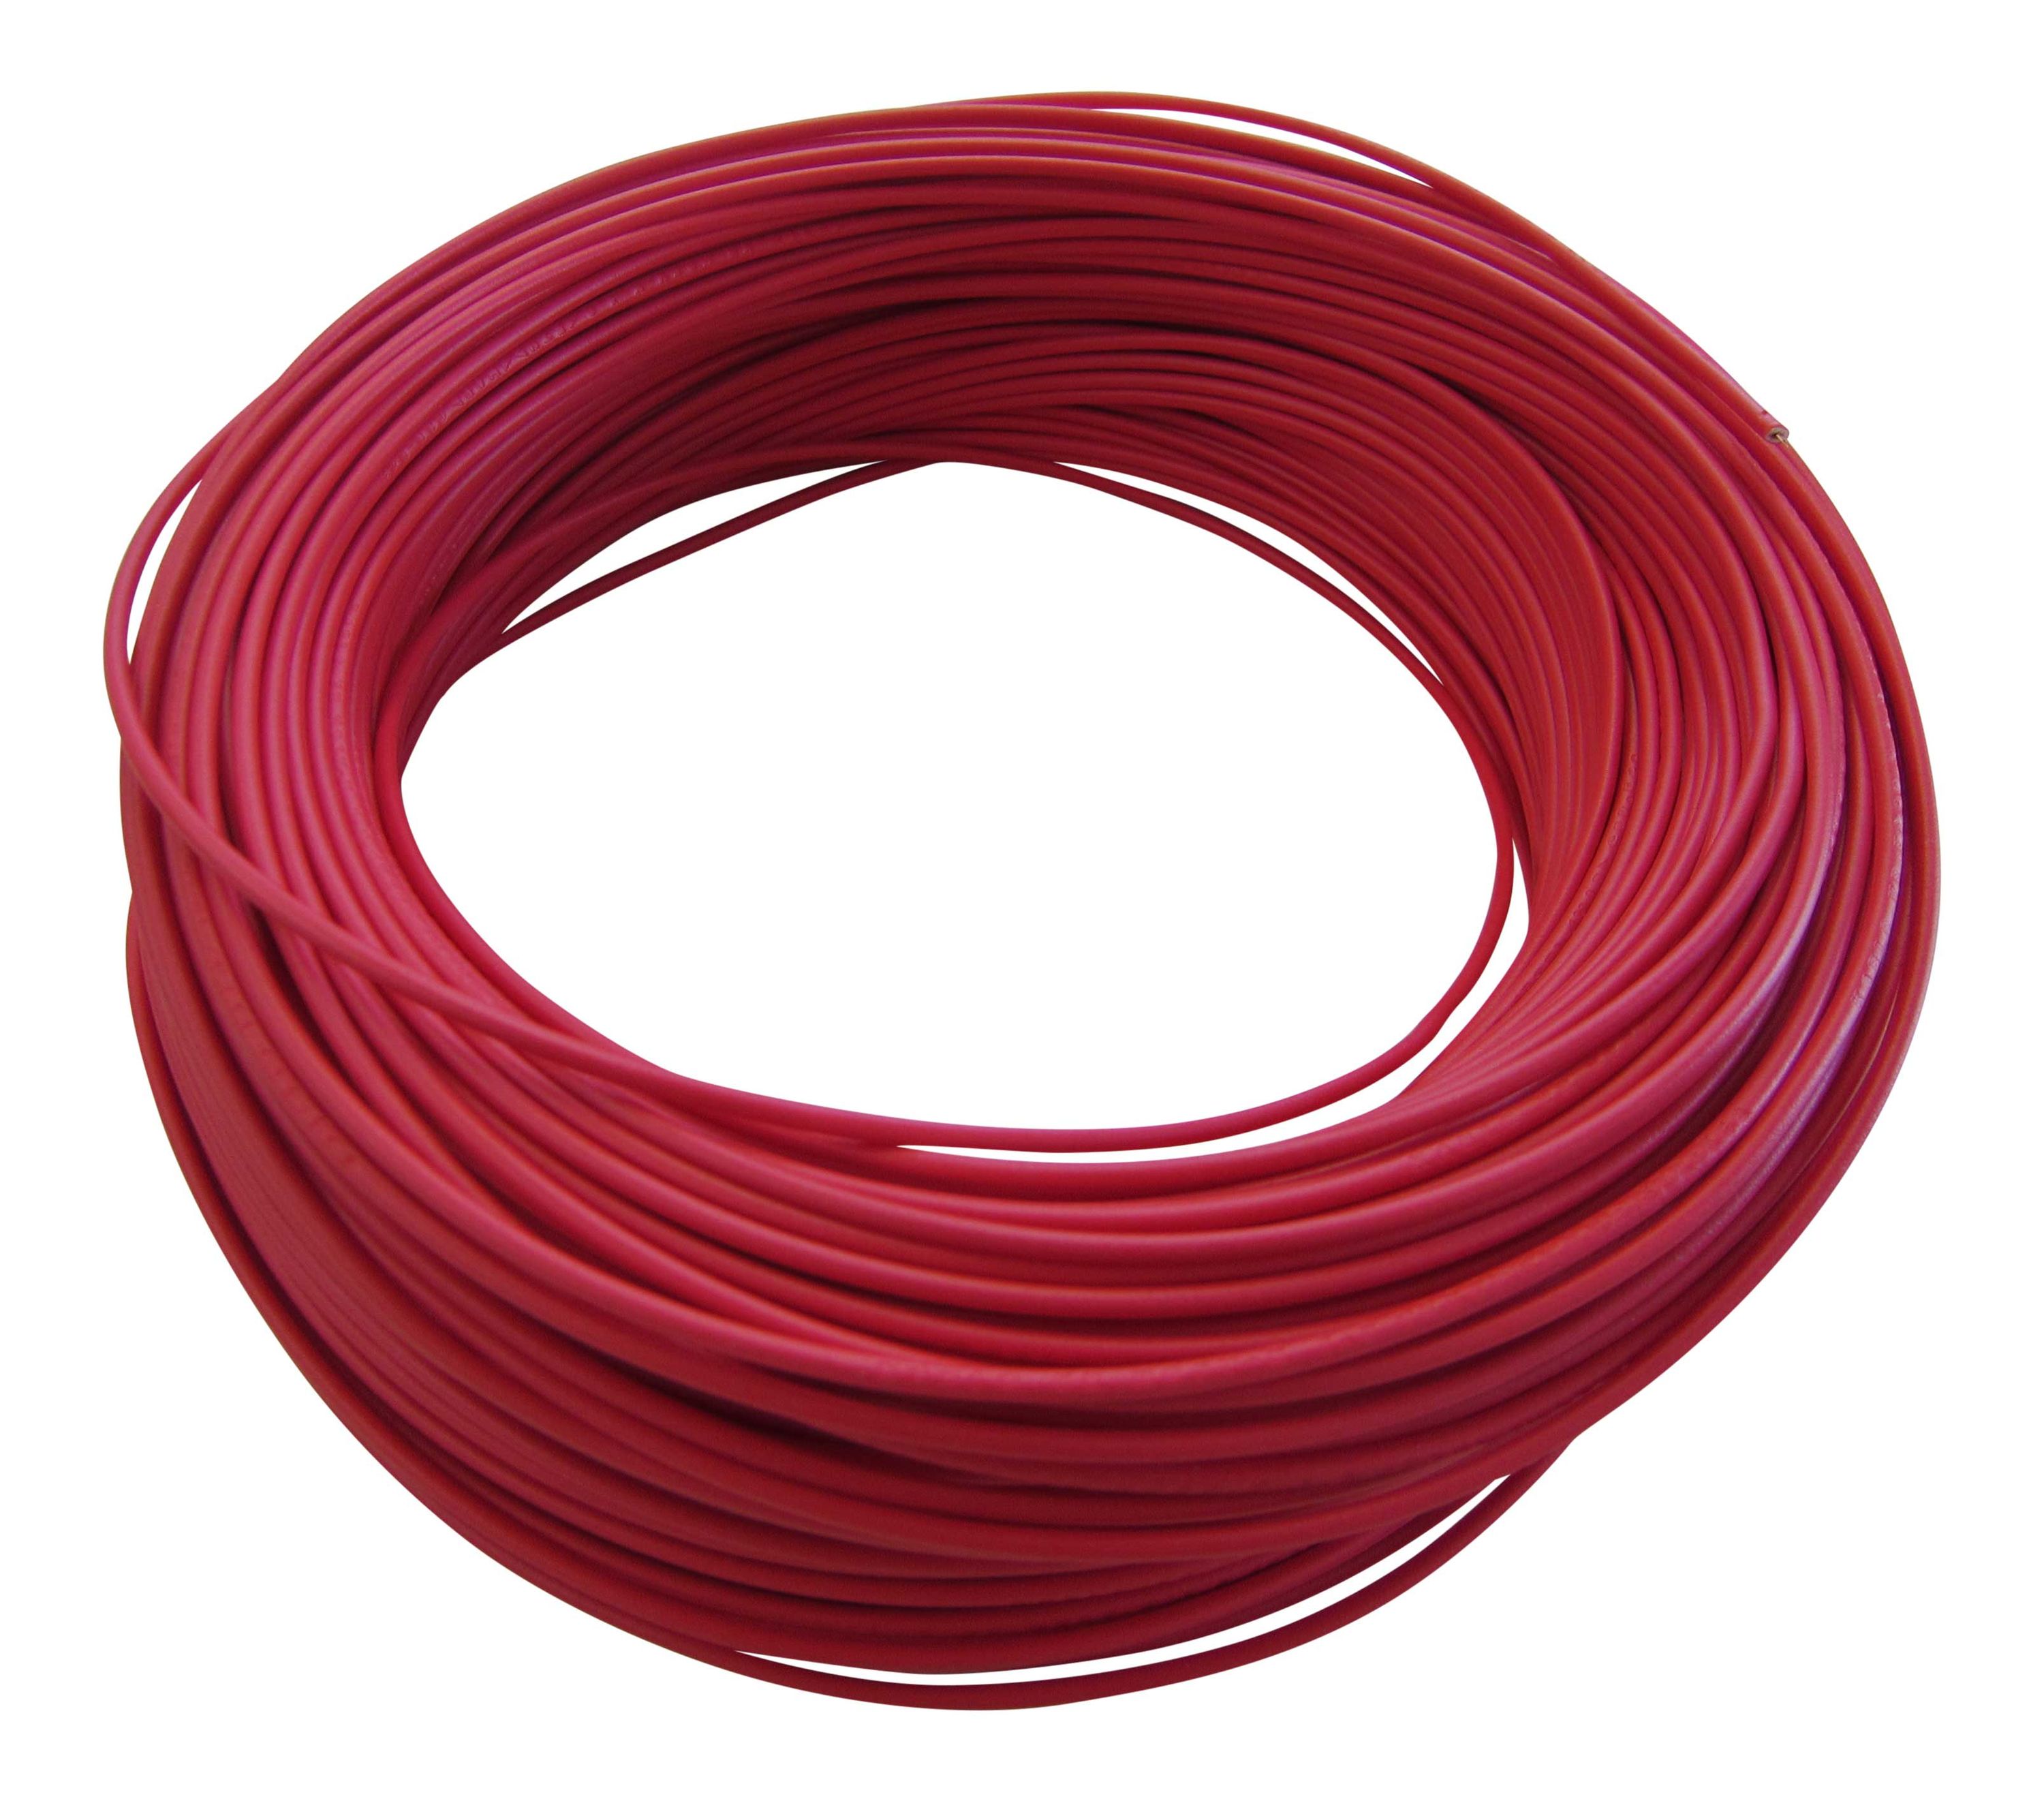 0,29€/m KFZ LKW Kabel Litze Leitung Flexible FLRy 0,5mm² 20m Rot / M. in Germany